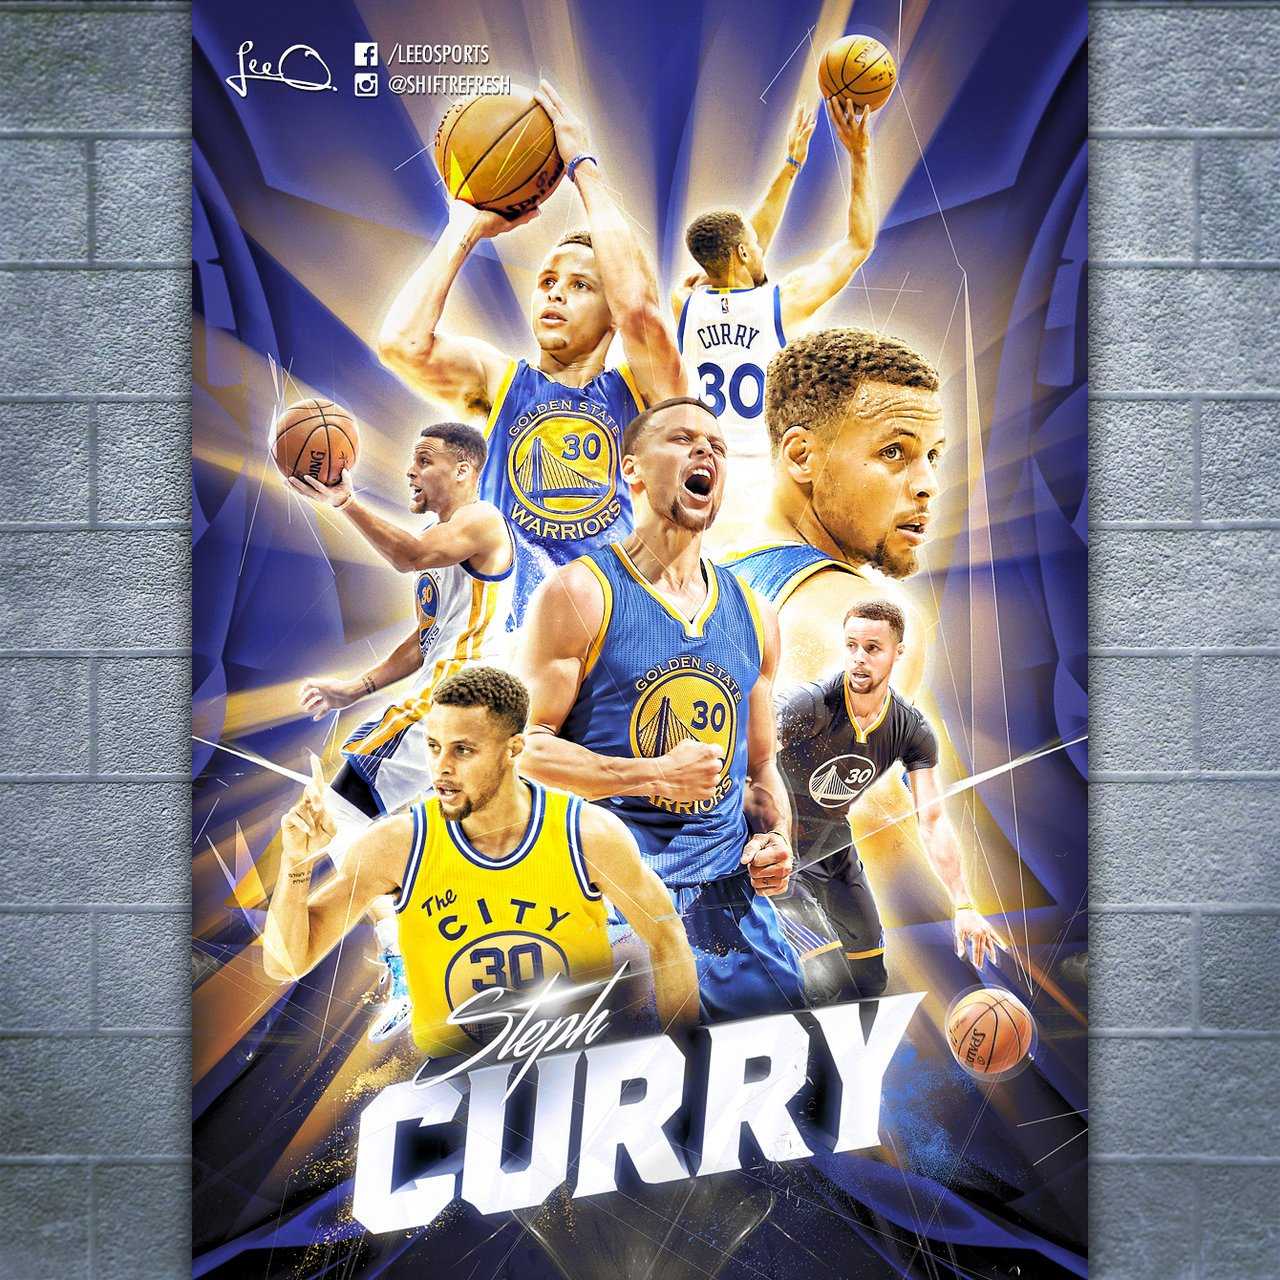 Stephen Curry Cool Wallpaper